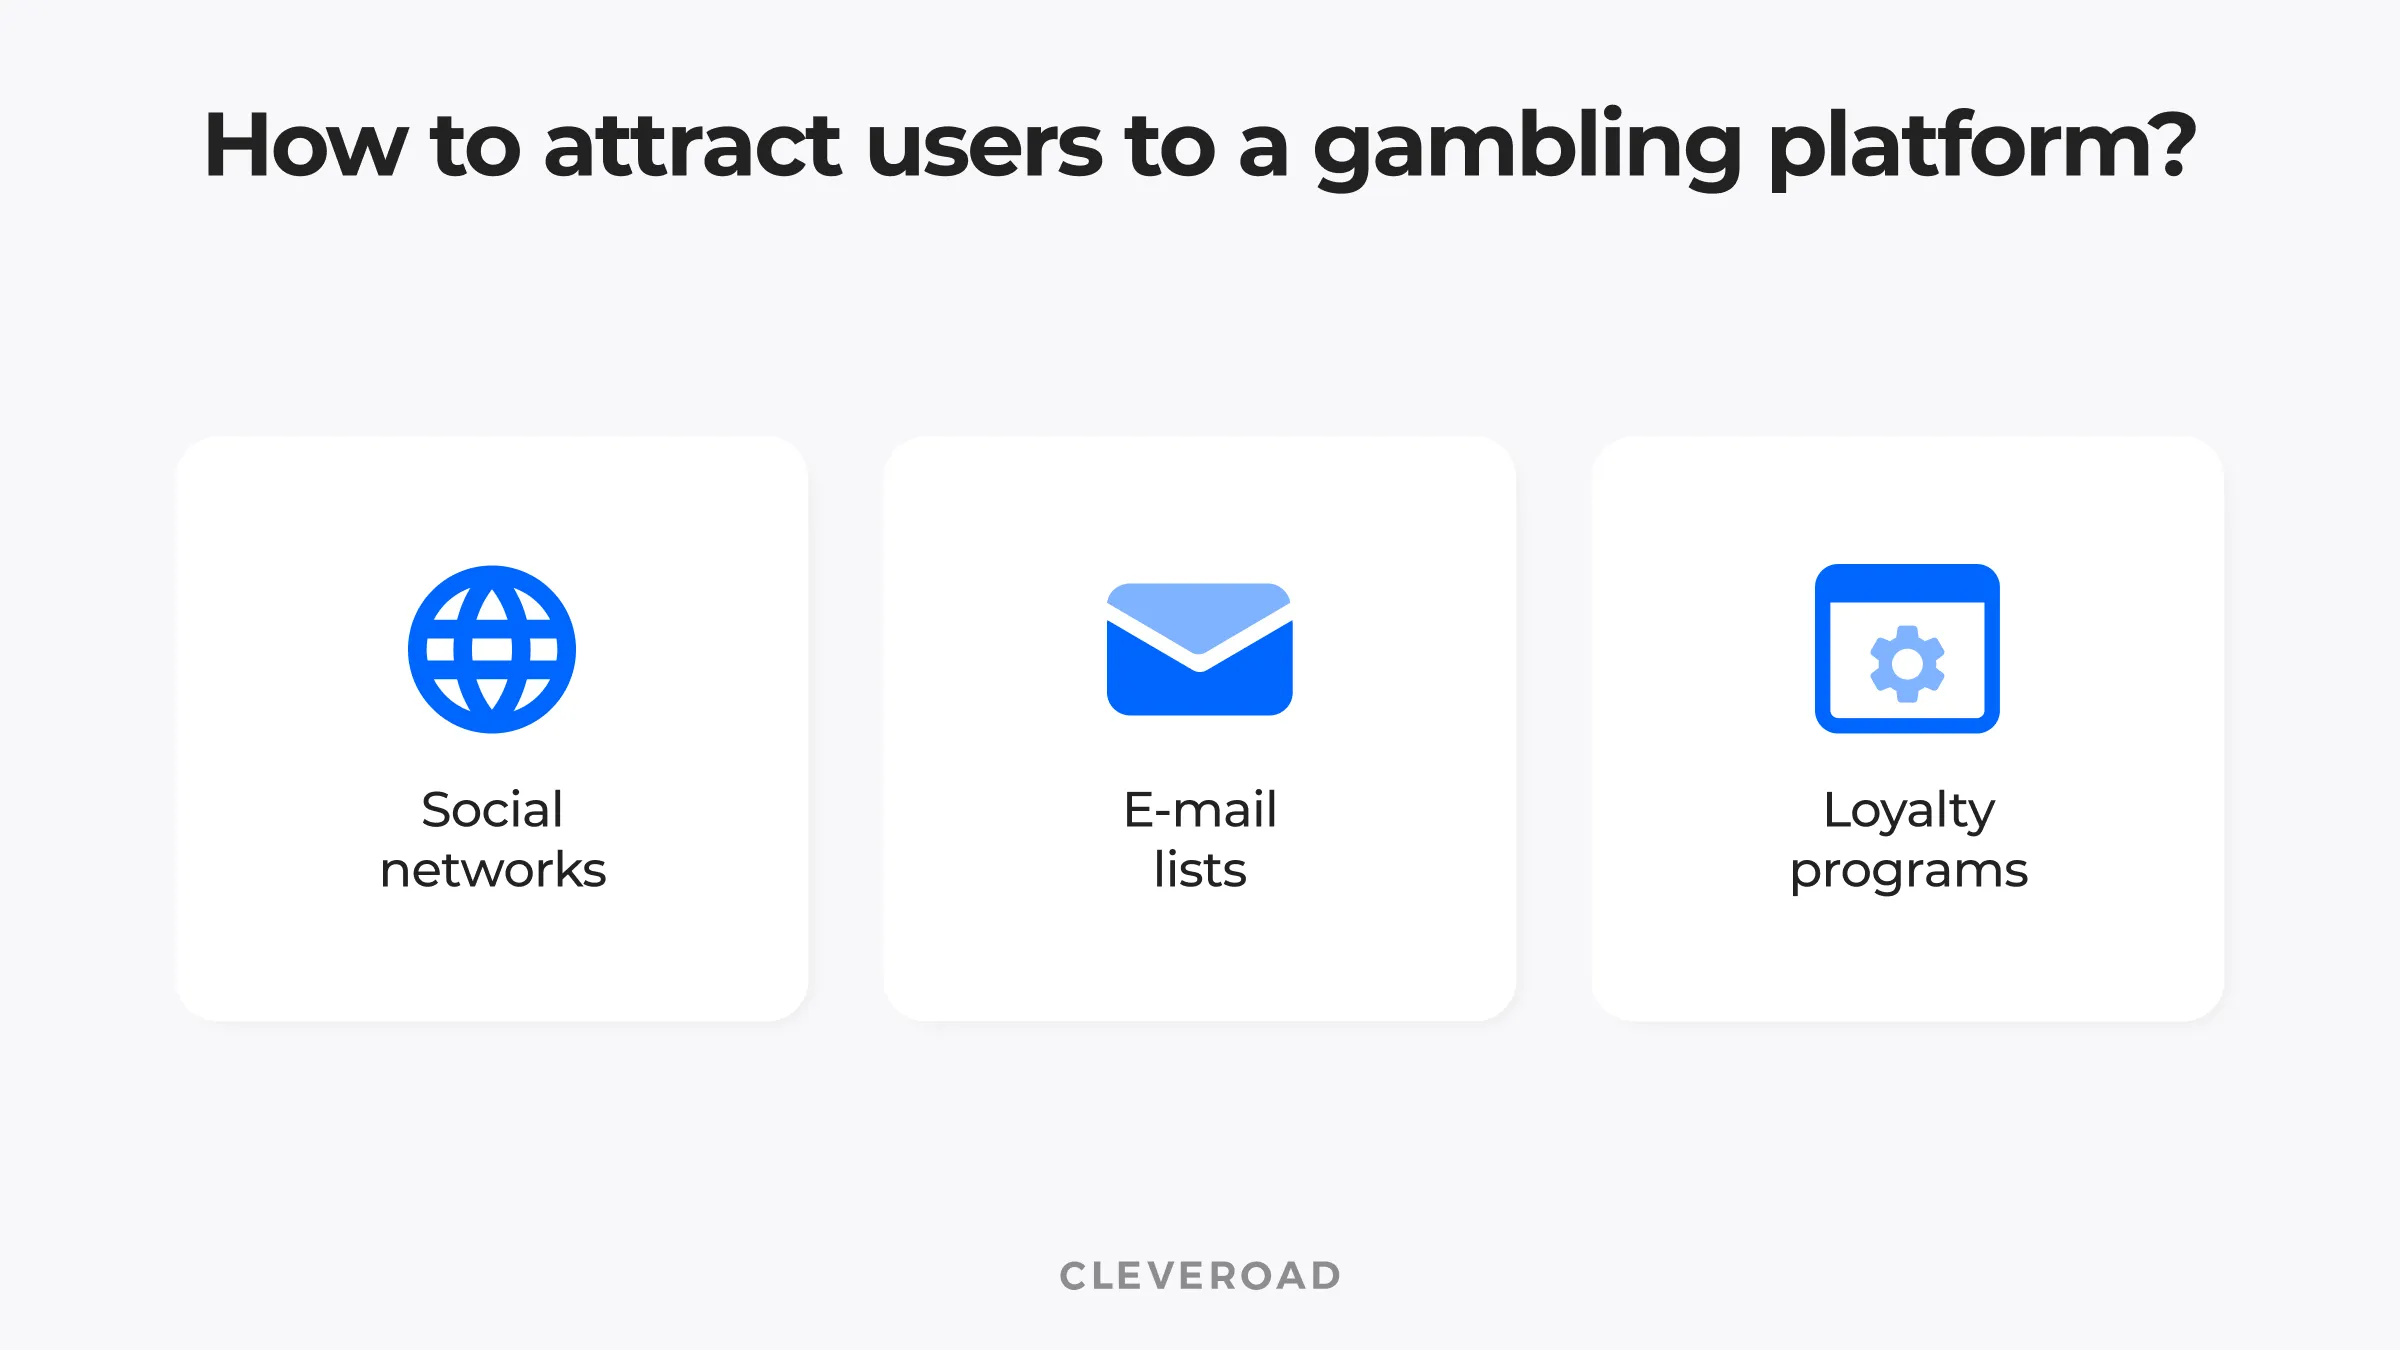 How to attract users to an online casino